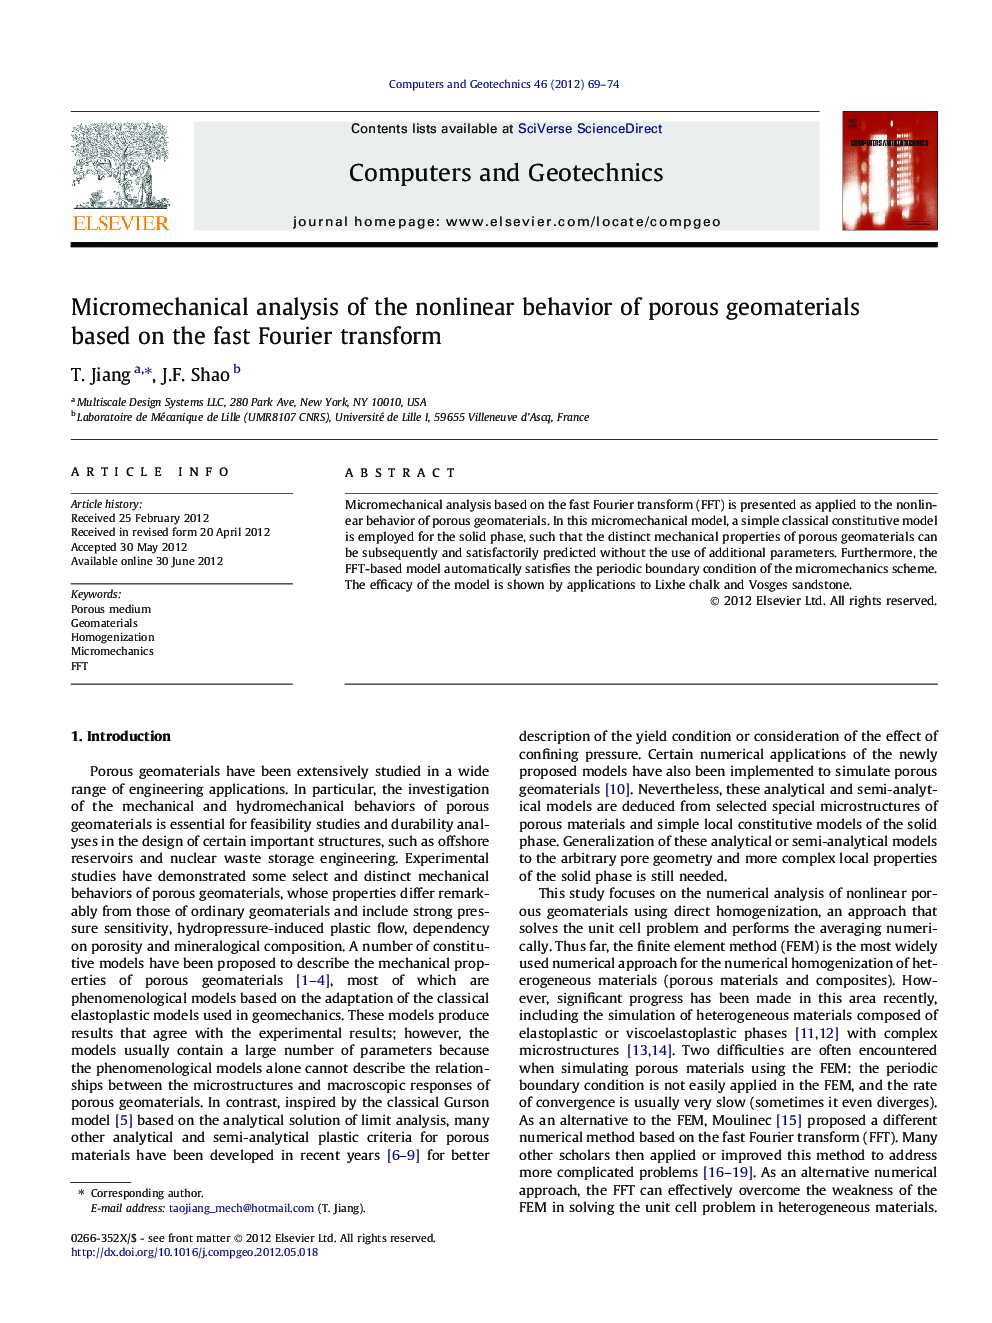 Micromechanical analysis of the nonlinear behavior of porous geomaterials based on the fast Fourier transform